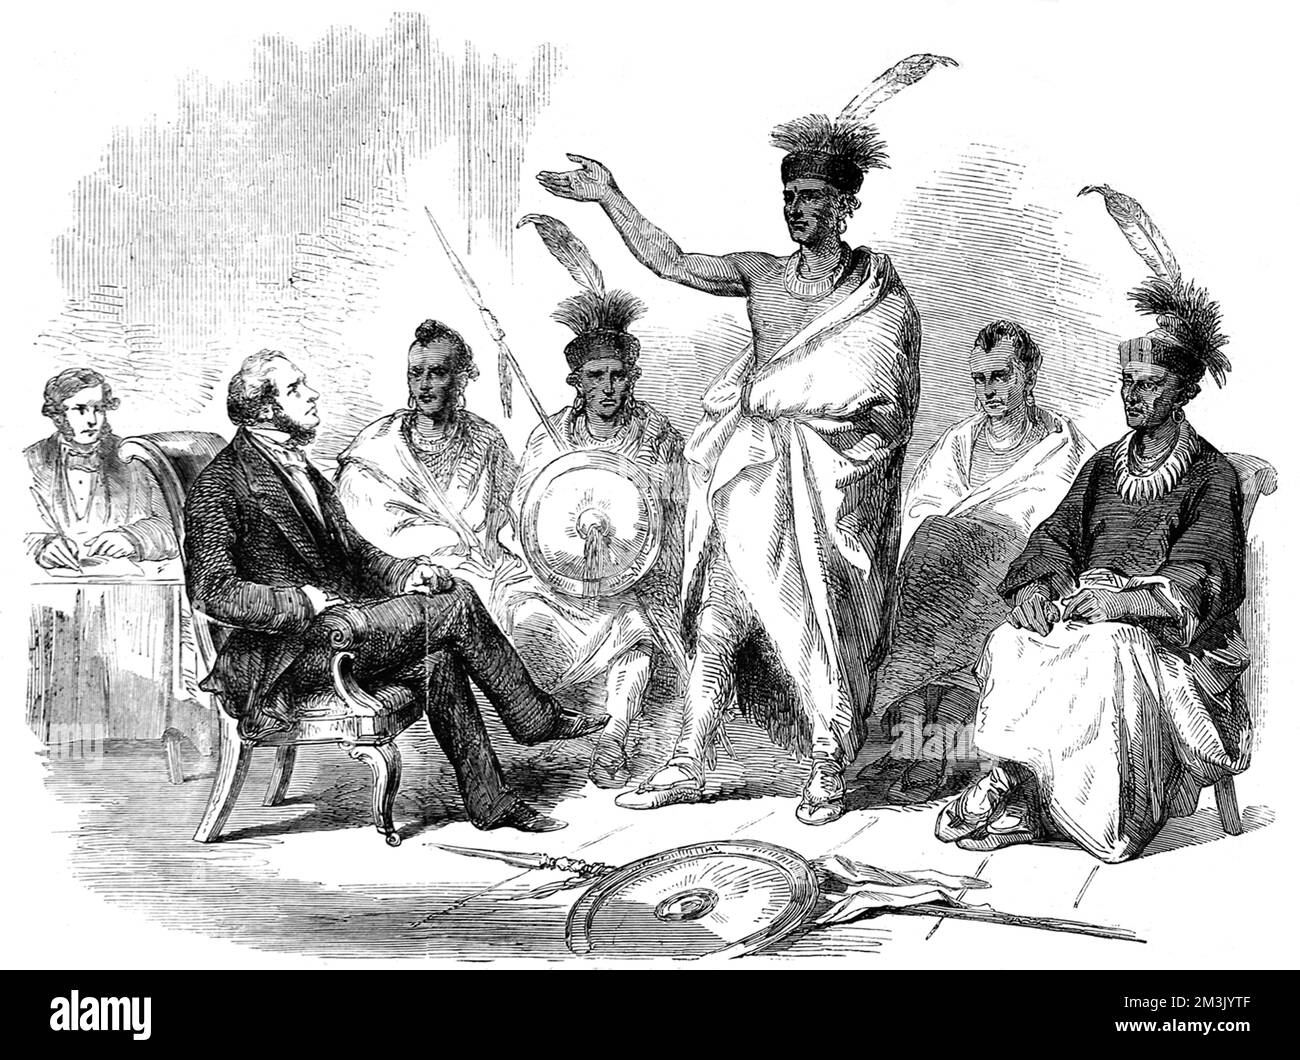 Kaw native American Indians appealing to the United States Commissioner of Indian Affairs to protect their land from settlers, 1857.   The Kaw, who lived in Kansas, are shown wearing mohican hairstyles, plumed headdresses, shawls and carrying round shields. Stock Photo